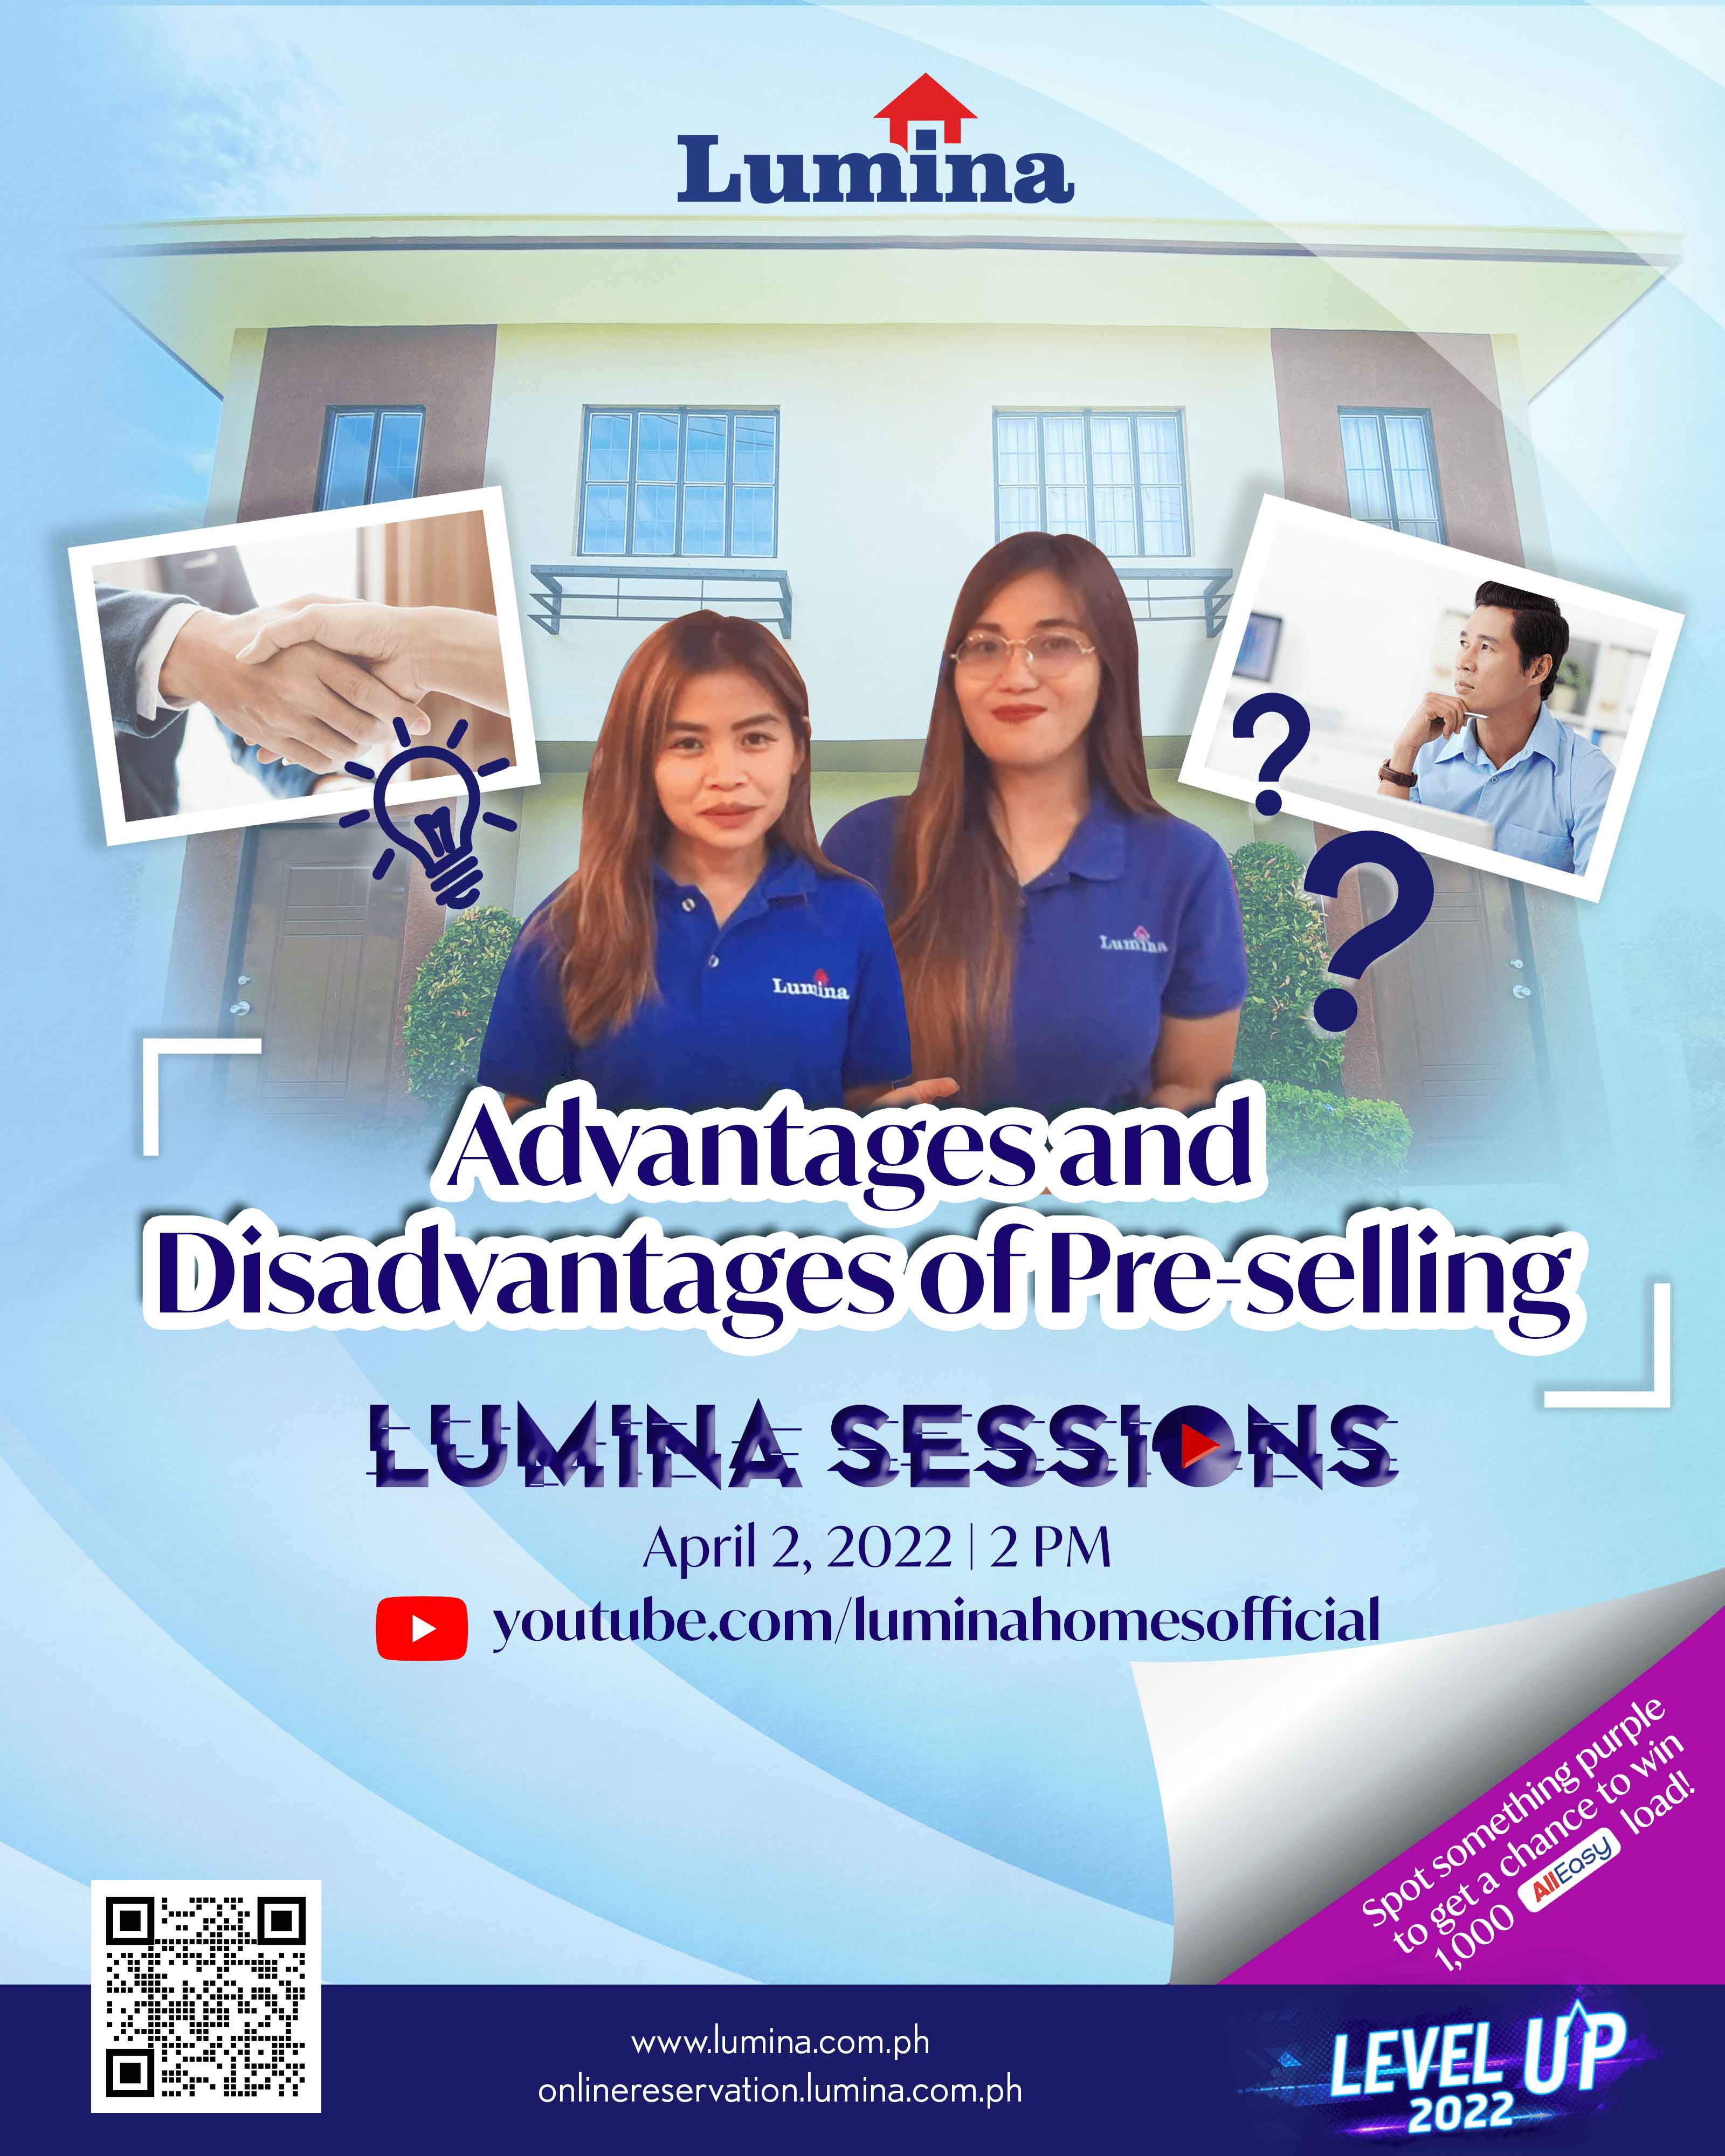 lumina session advantages and disadvantages of pre selling